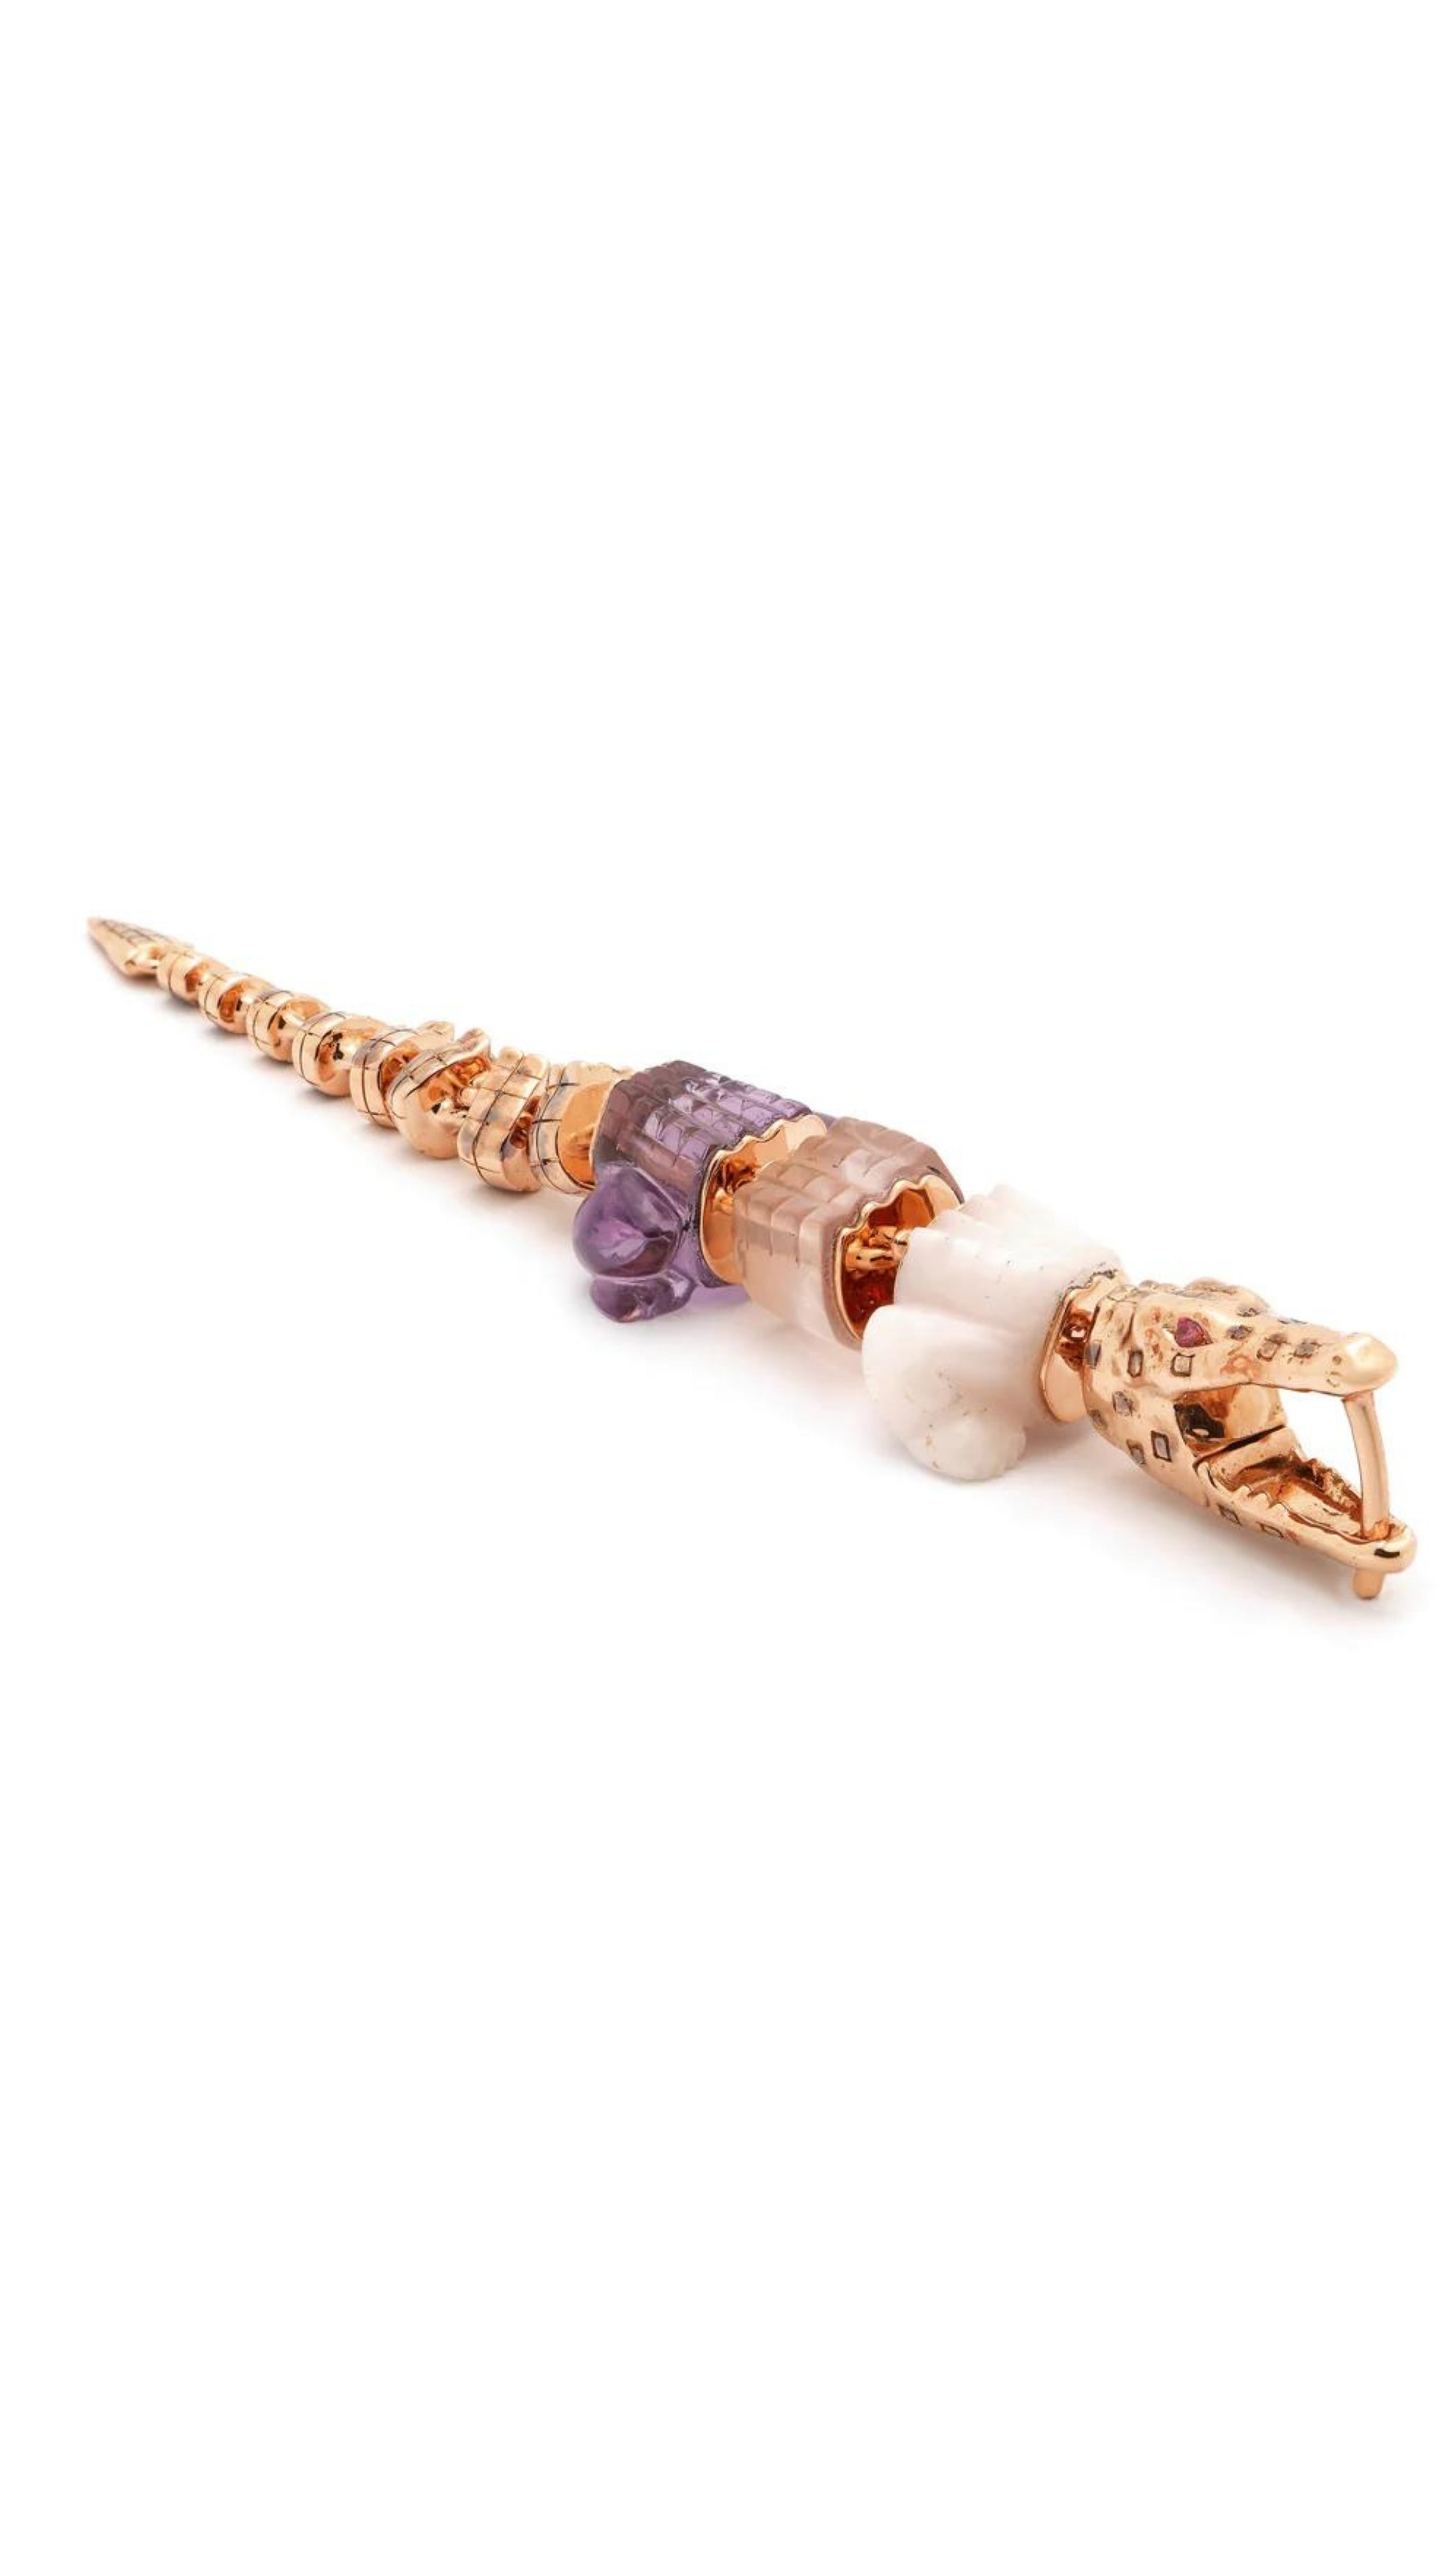 Bibi van der Velden Pink Gradient Alligator Vertebrae Bite Single Earring A single earring in the shape of an alligator made from 18K rose gold and rose quartz, amethyst, pink opal. It features sapphire eyes and the alligator body moves. Photo shows earring laying flat.